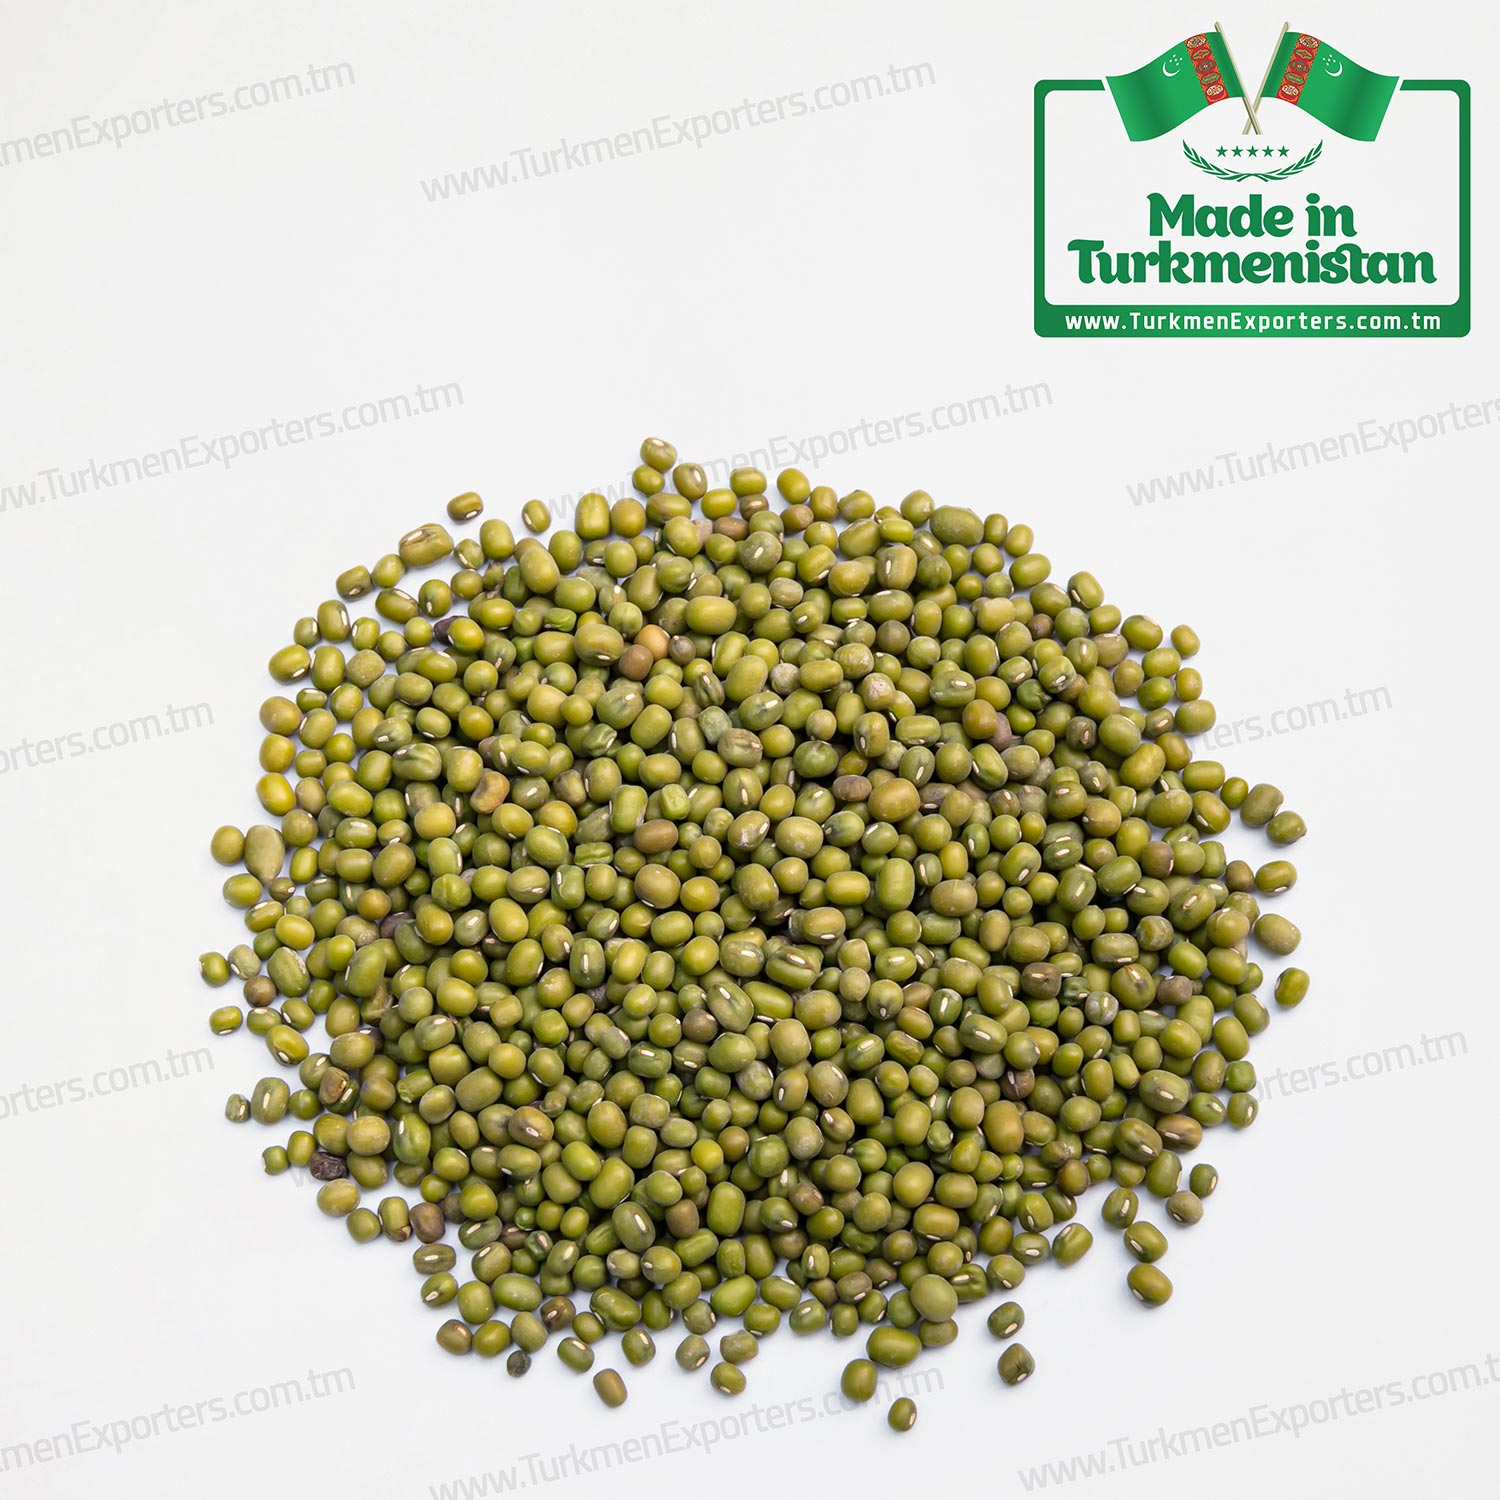 Green mung beans wholesale for export from Turkmenistan | Agricultural complex of Turkmenistan